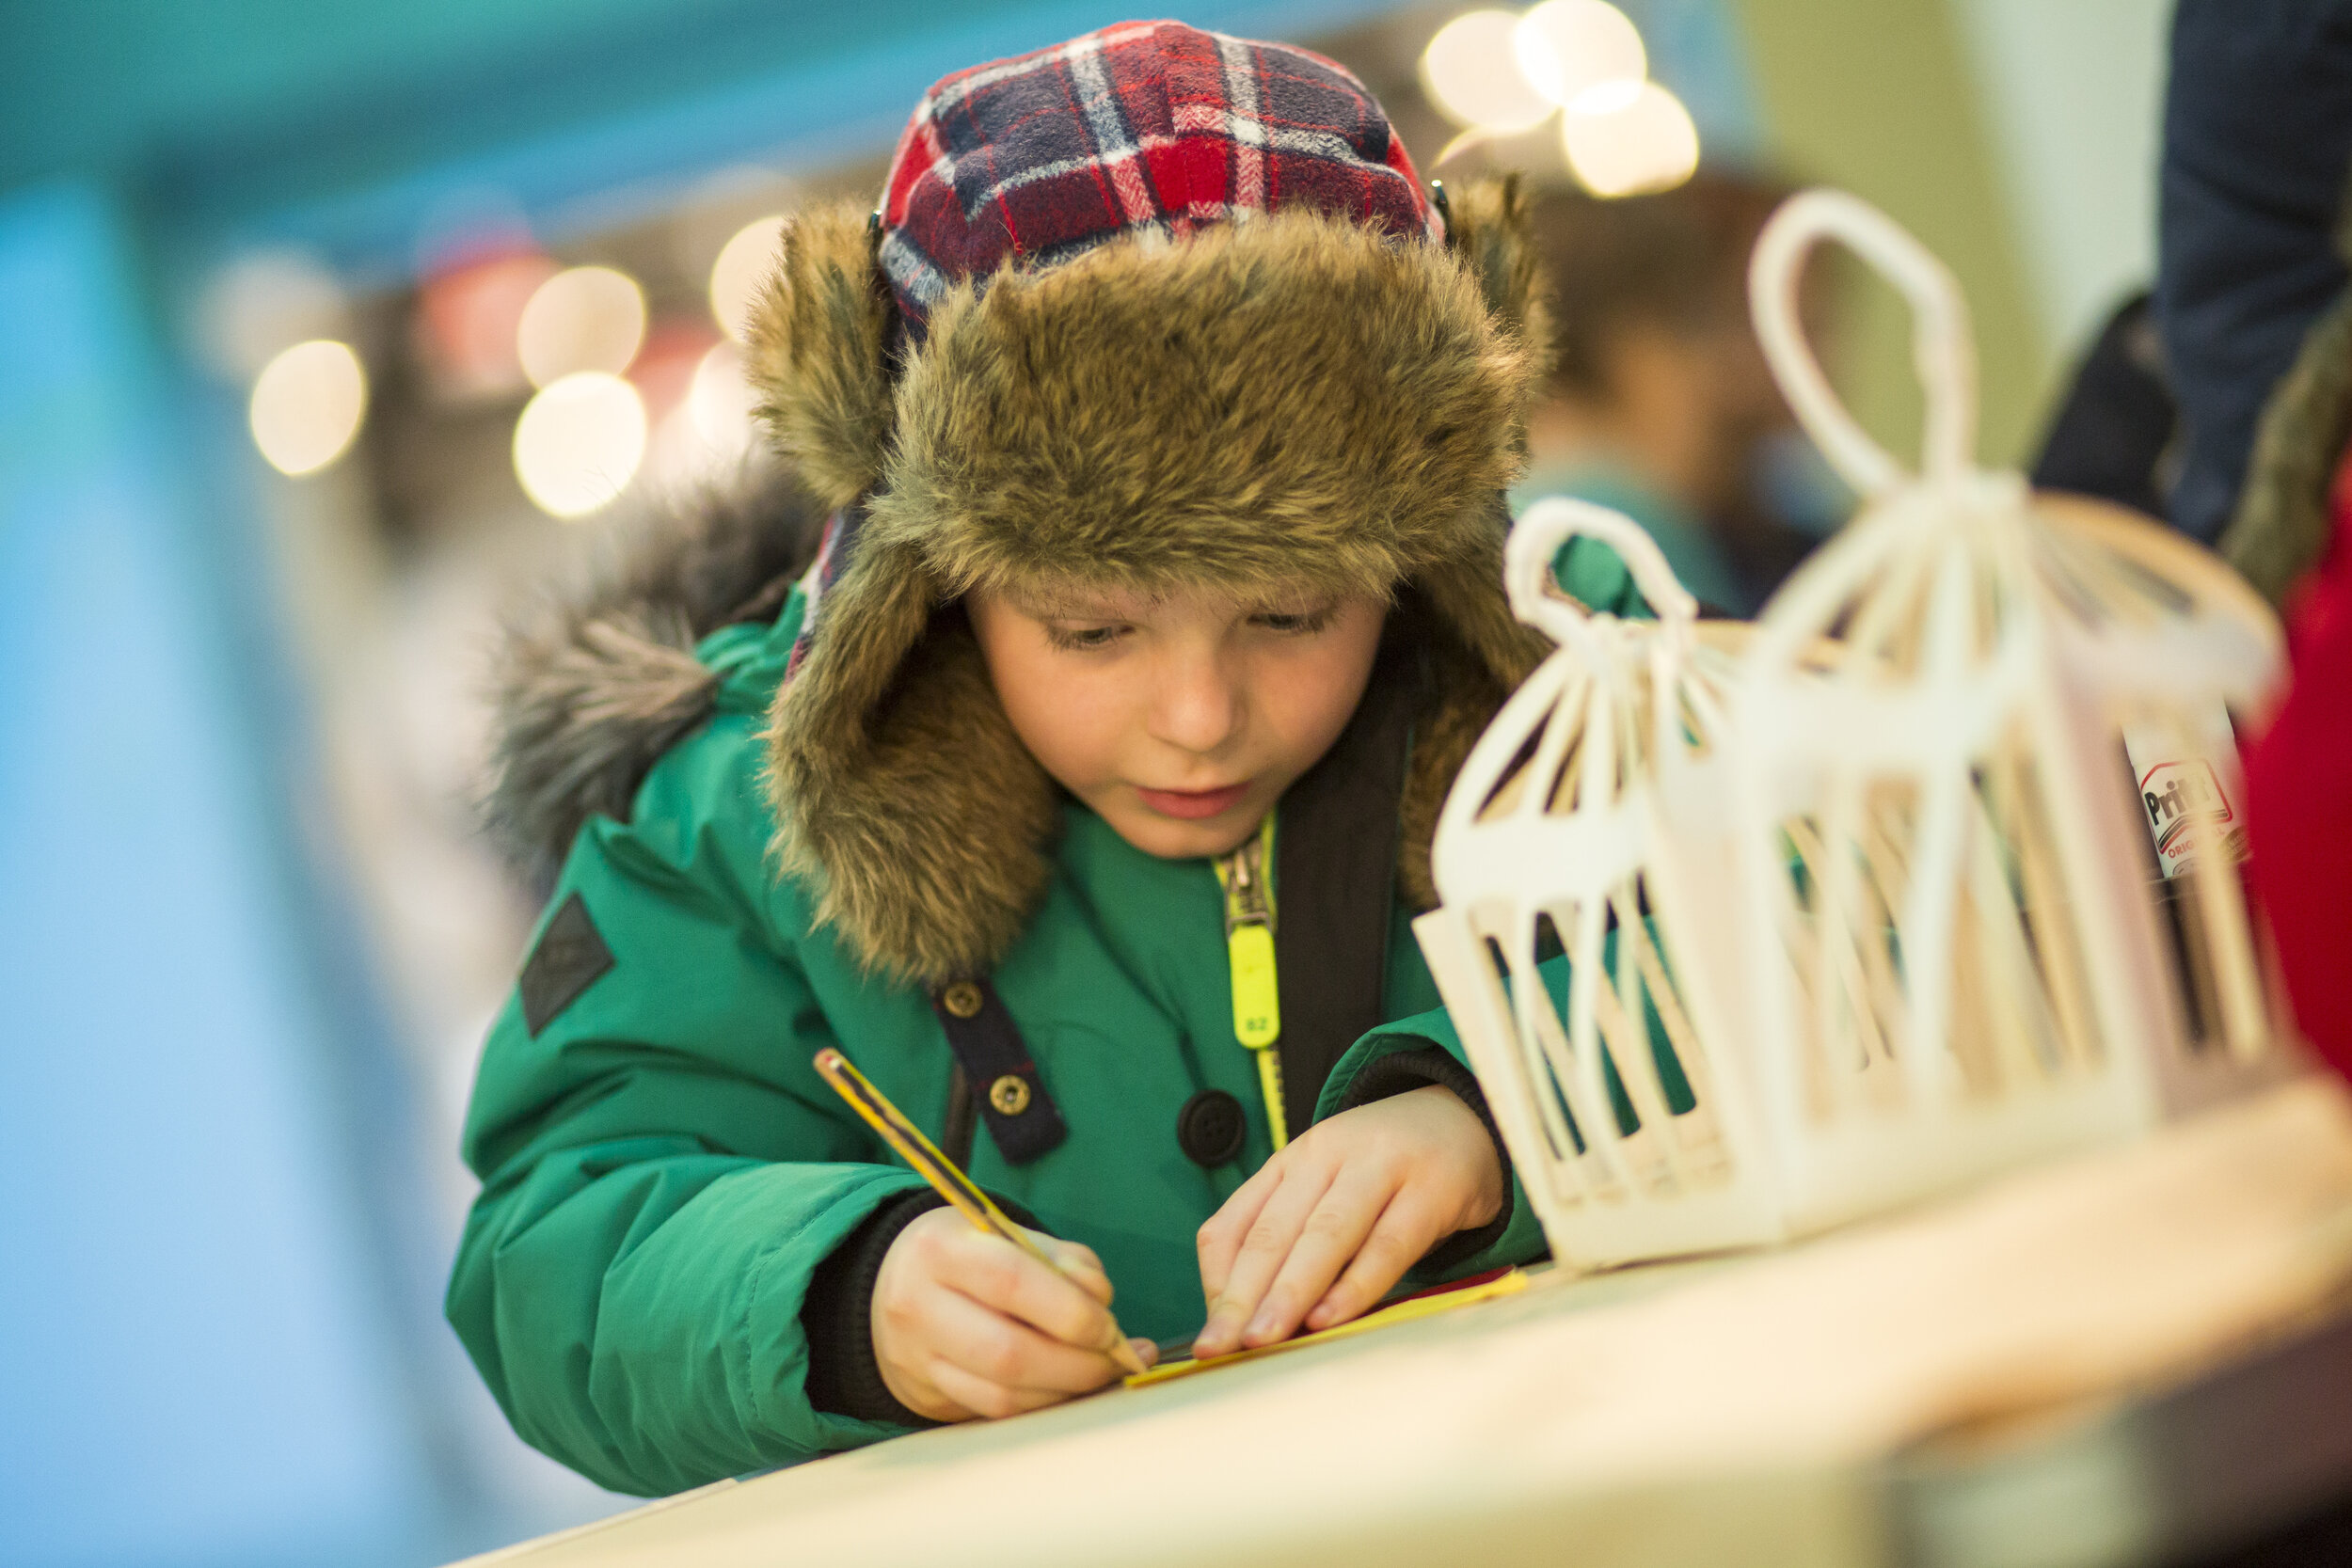  A child wearing a green coat writes with a pencil. 